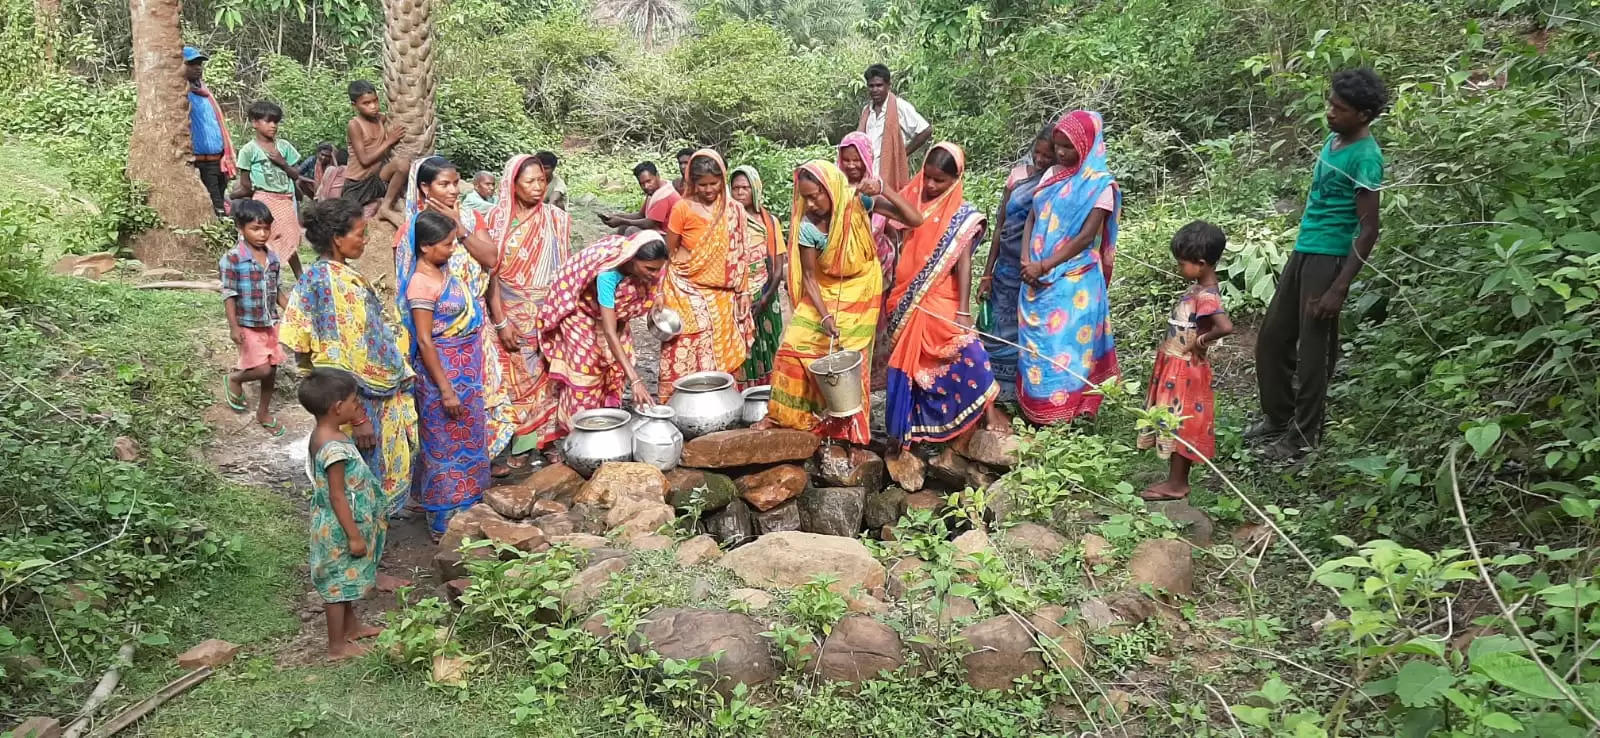 Even after 75 years of independence rural areas of Jharkhand struggle for basic amenities.